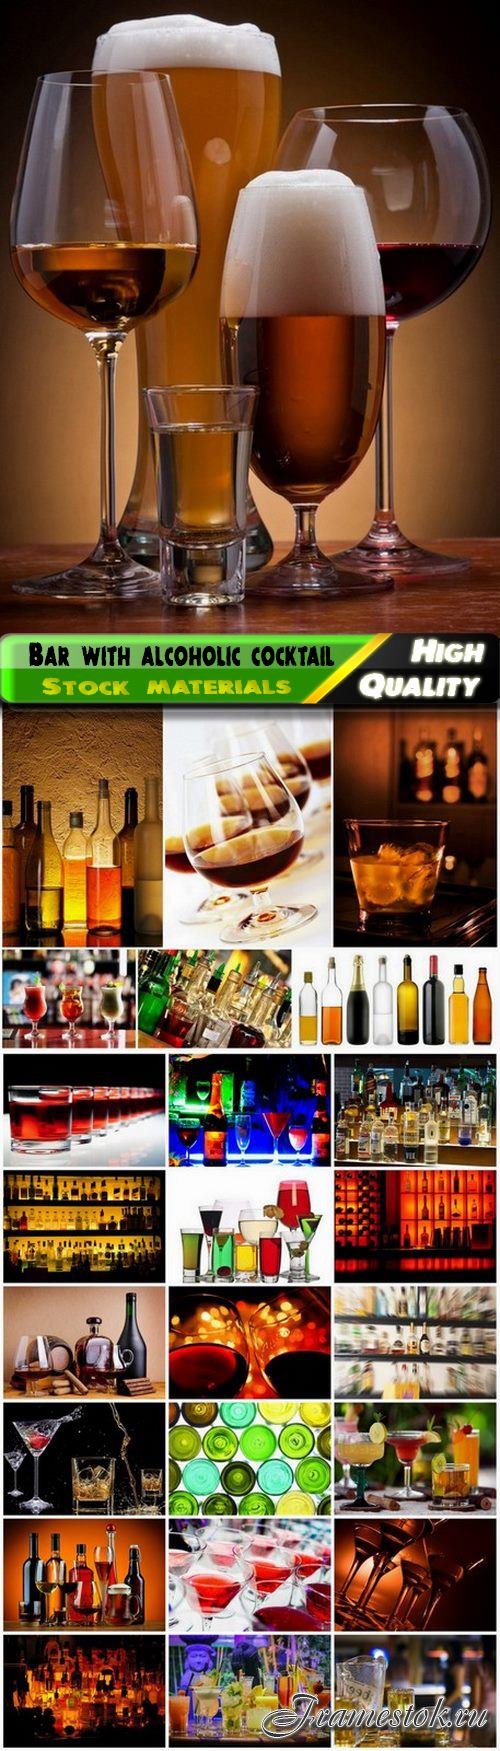 Bar with glass of alcoholic cocktail and bottle of drink - 25 HQ Jpg